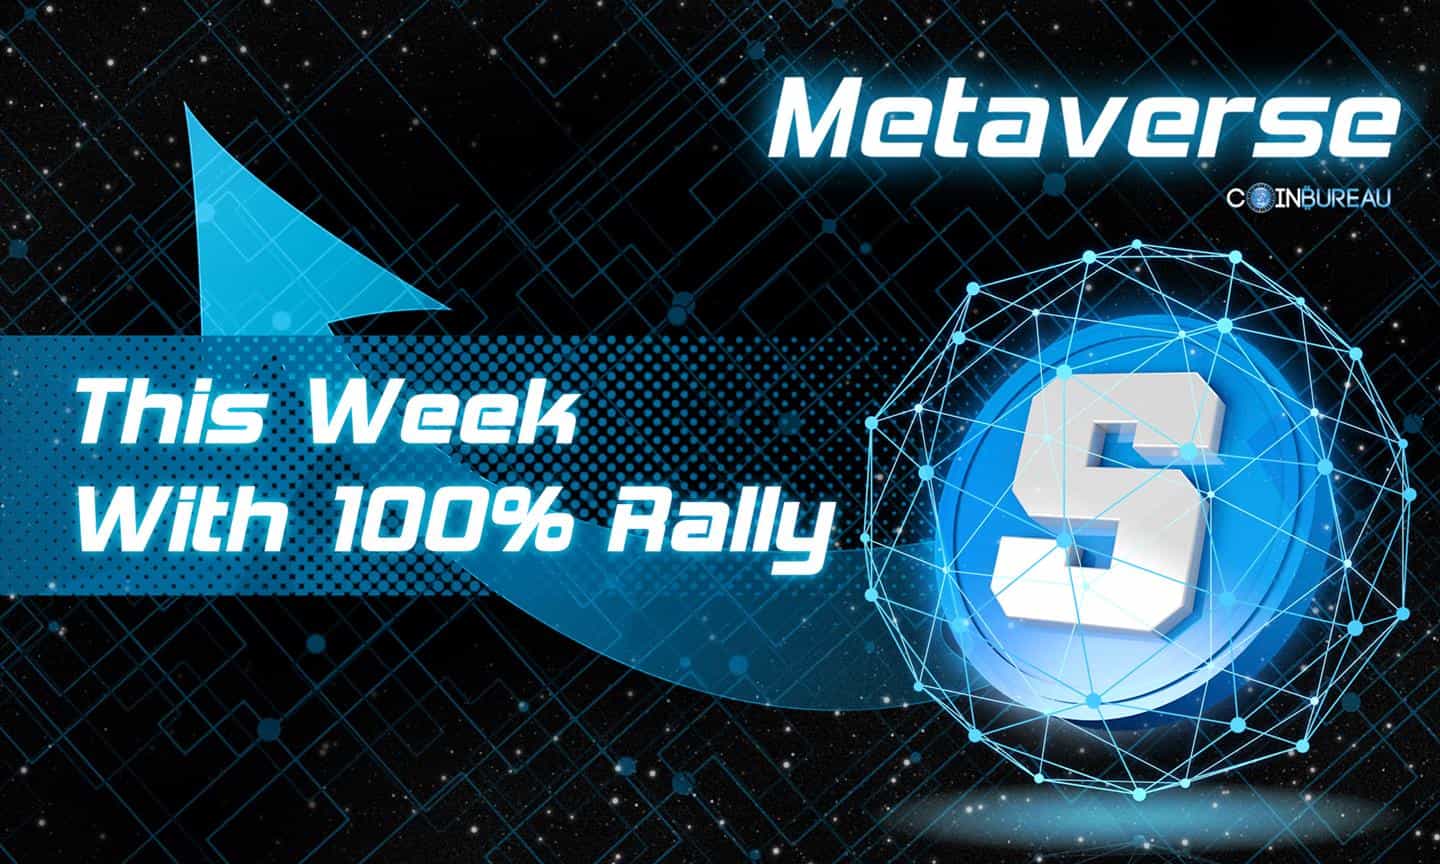 Metaverse Narrative Accelerates As The Sandbox (SAND) Defies Crypto Correction This Week With 100% Rally